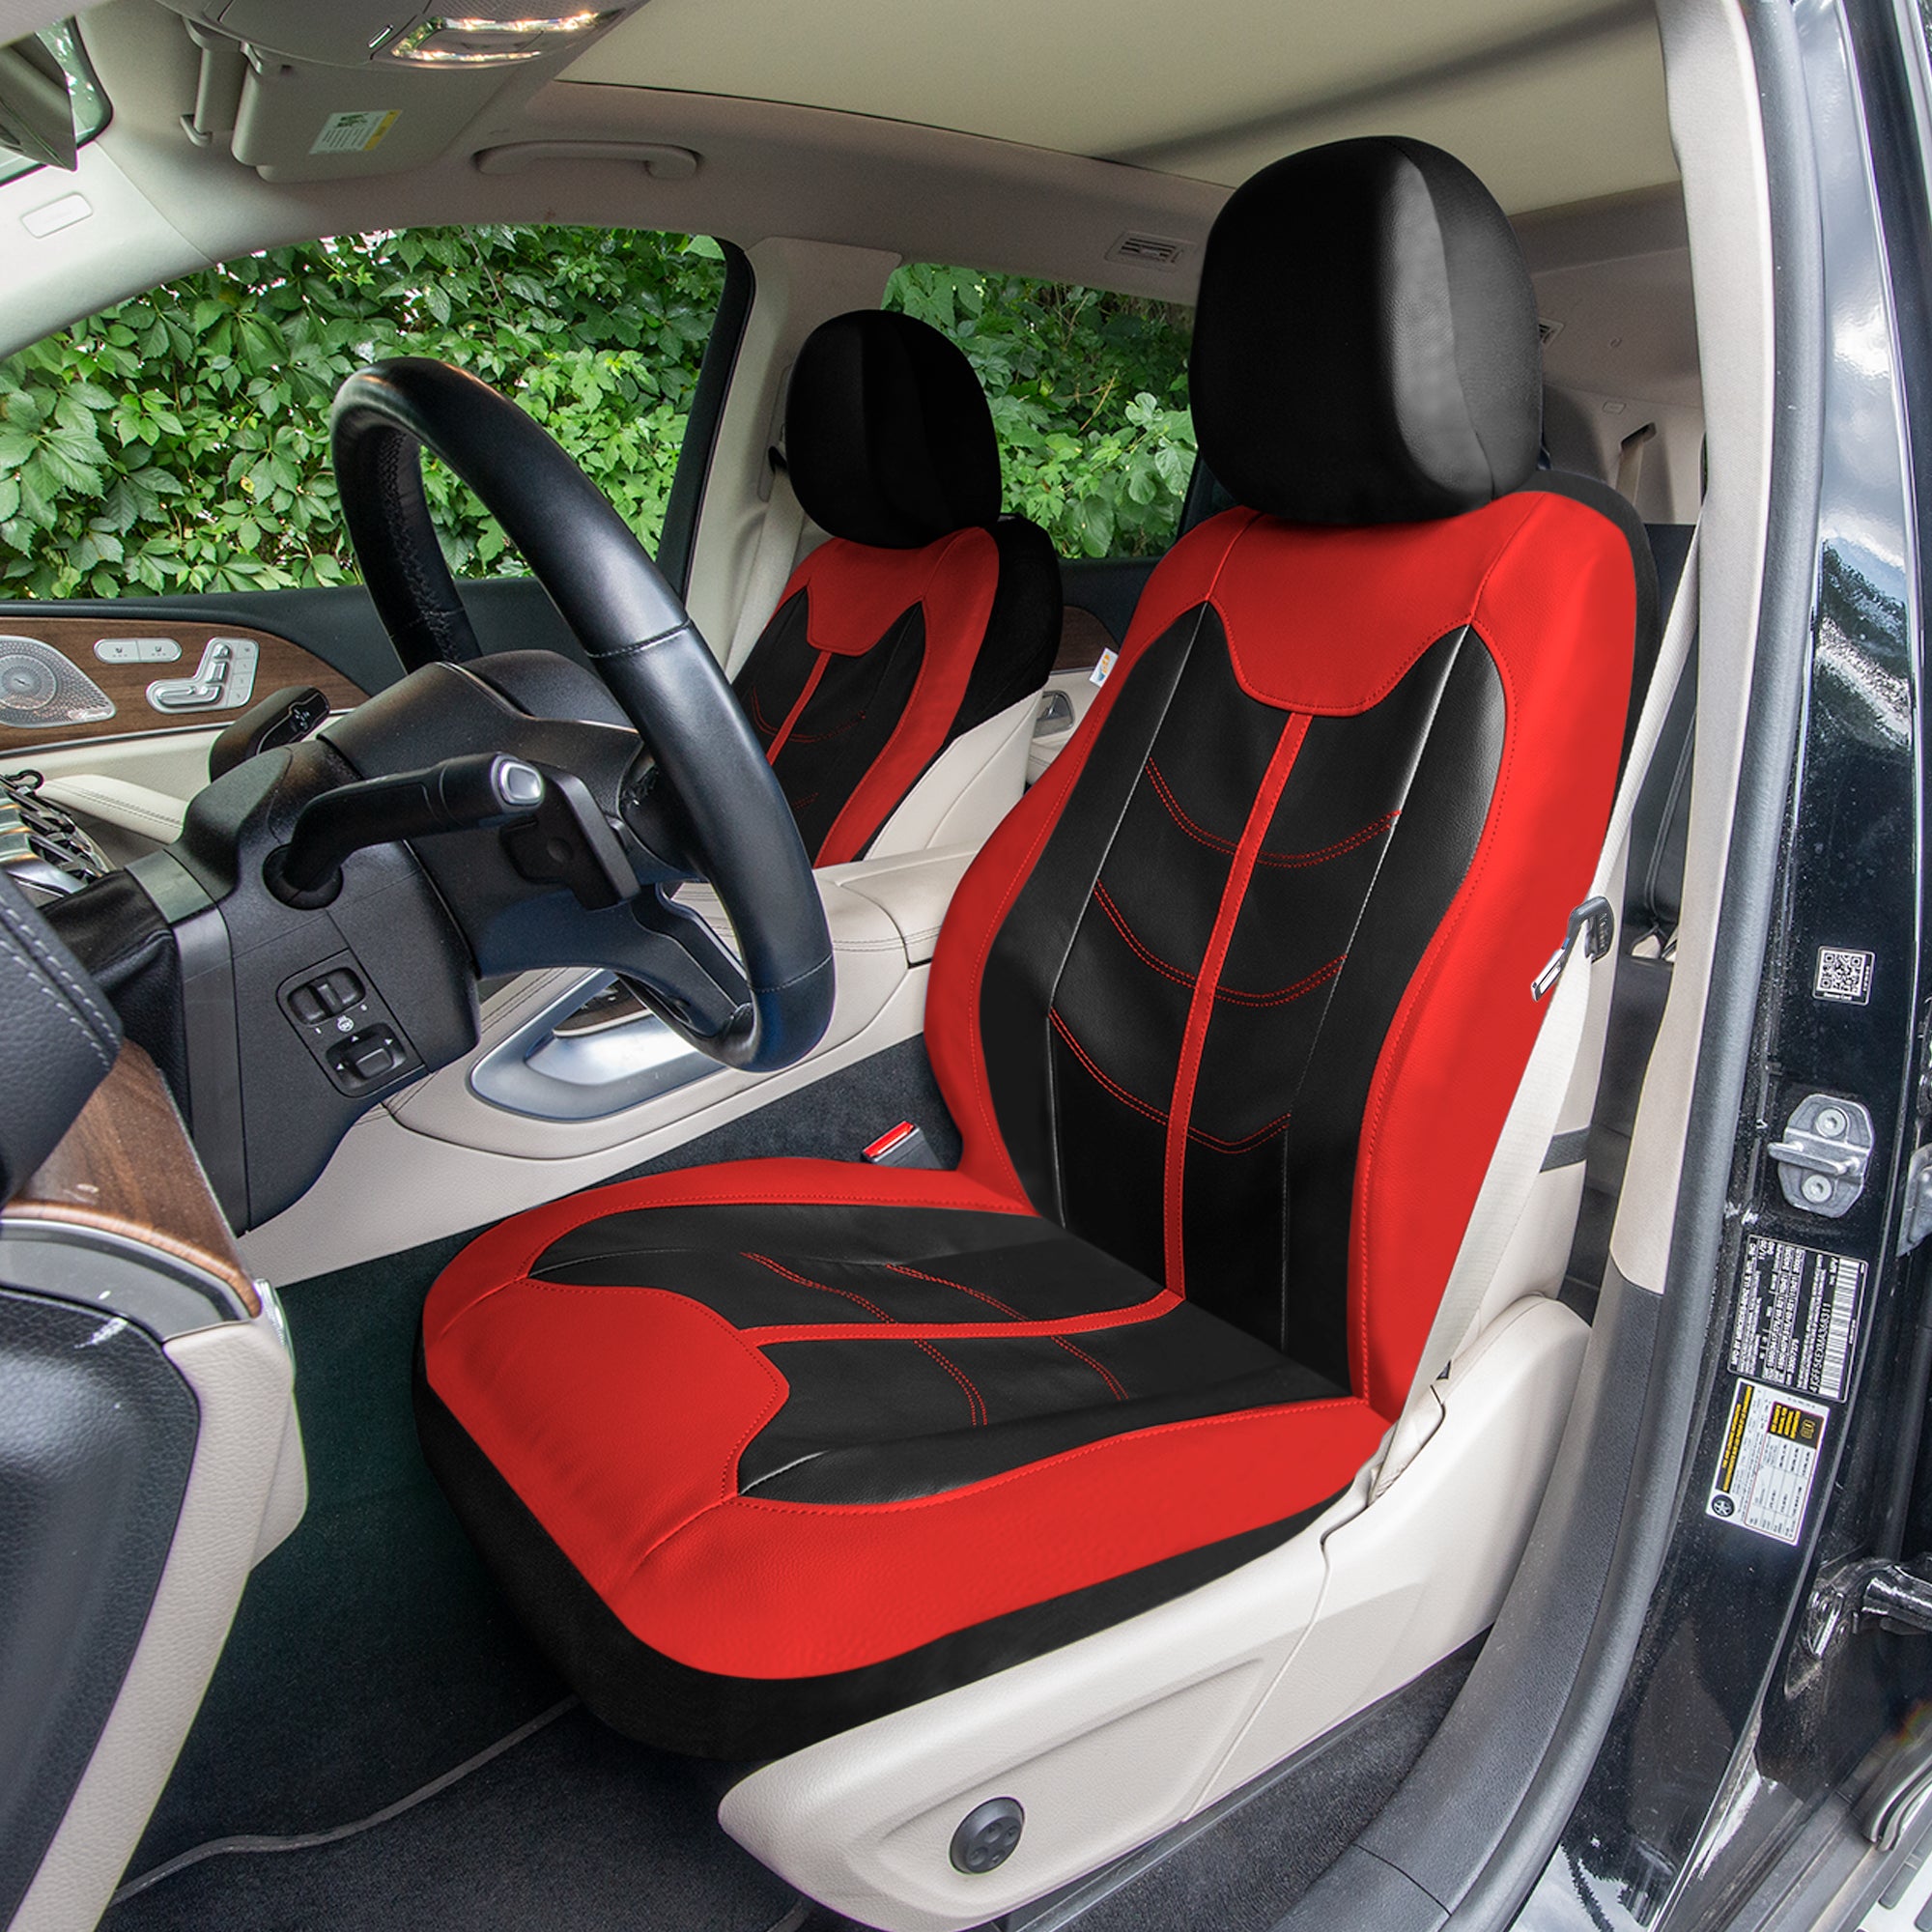 TLH Universal Fit Car Seat Cover - Full Set of Automotive Seat Covers Red